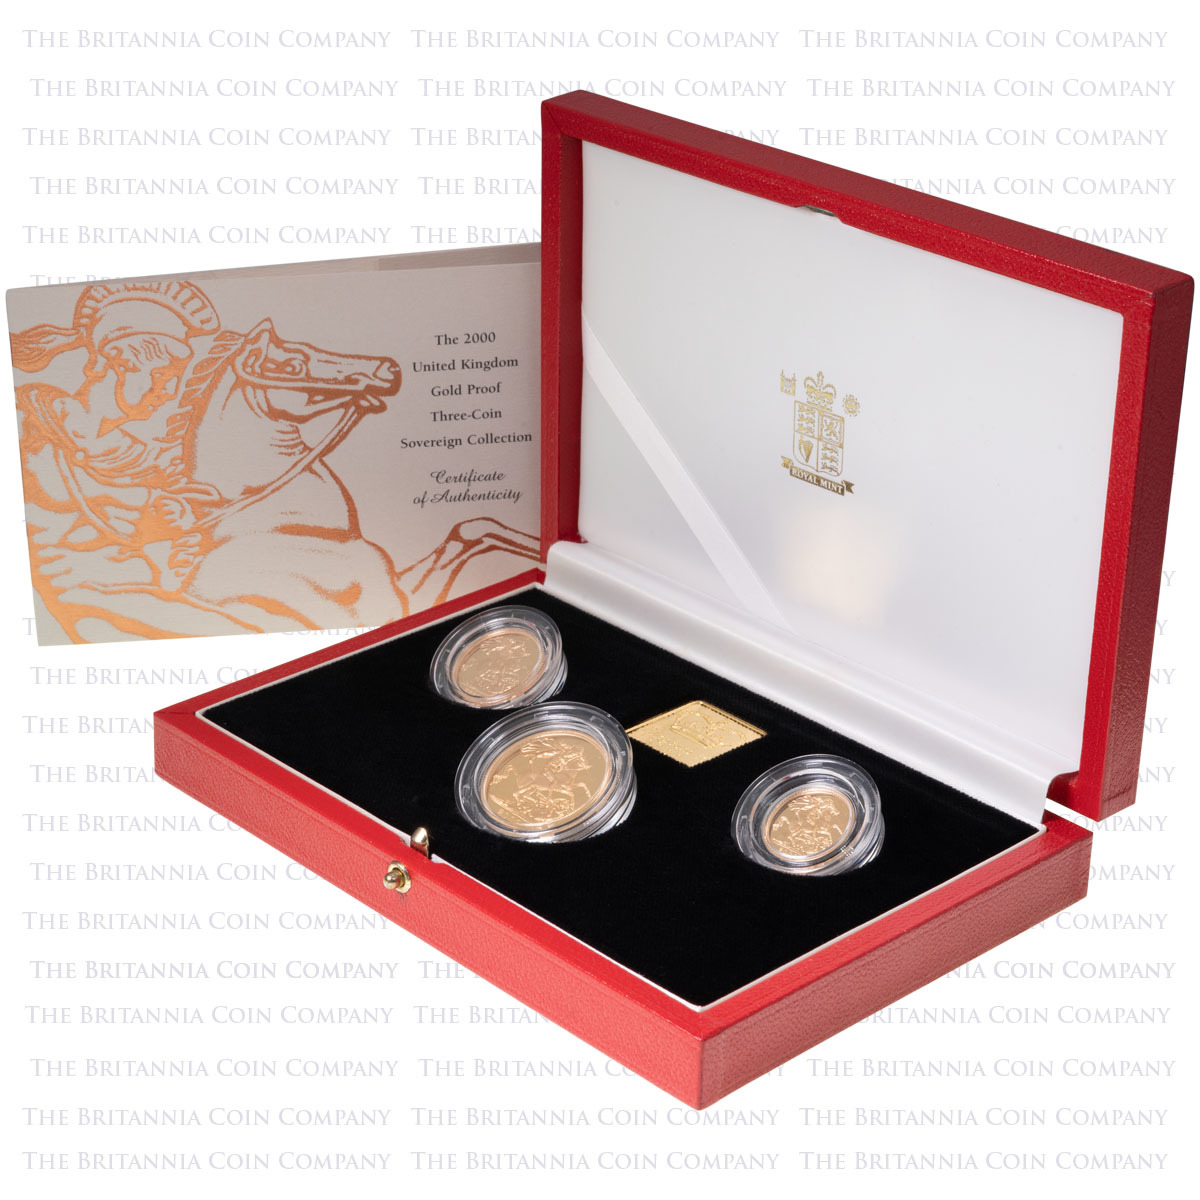 2000 Gold Proof Three Coin Sovereign Set Boxed